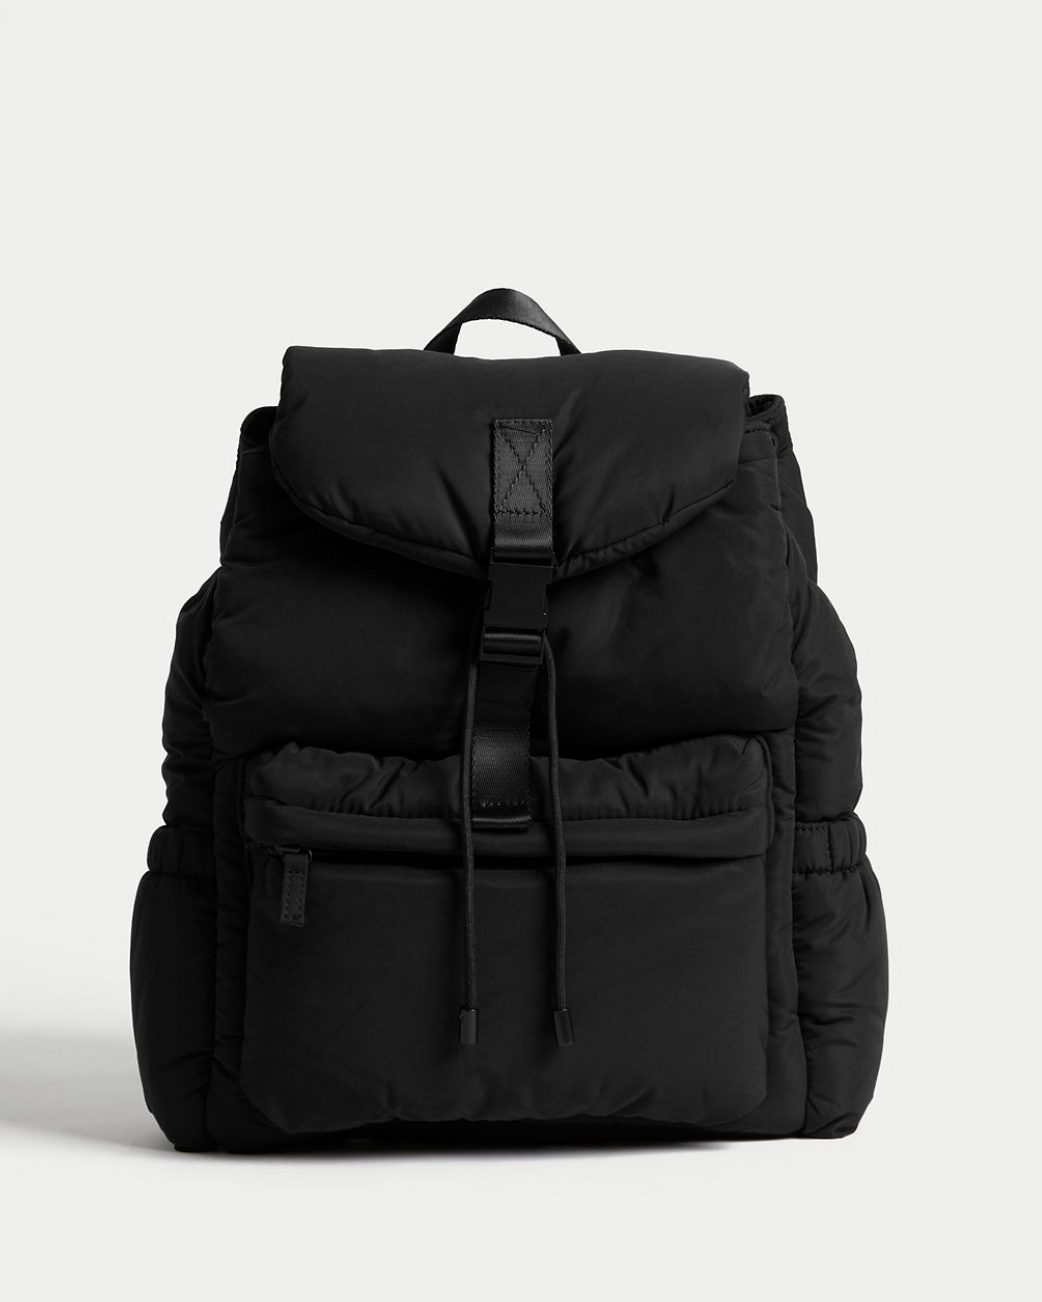 Stylish backpacks to shop now and wear forever